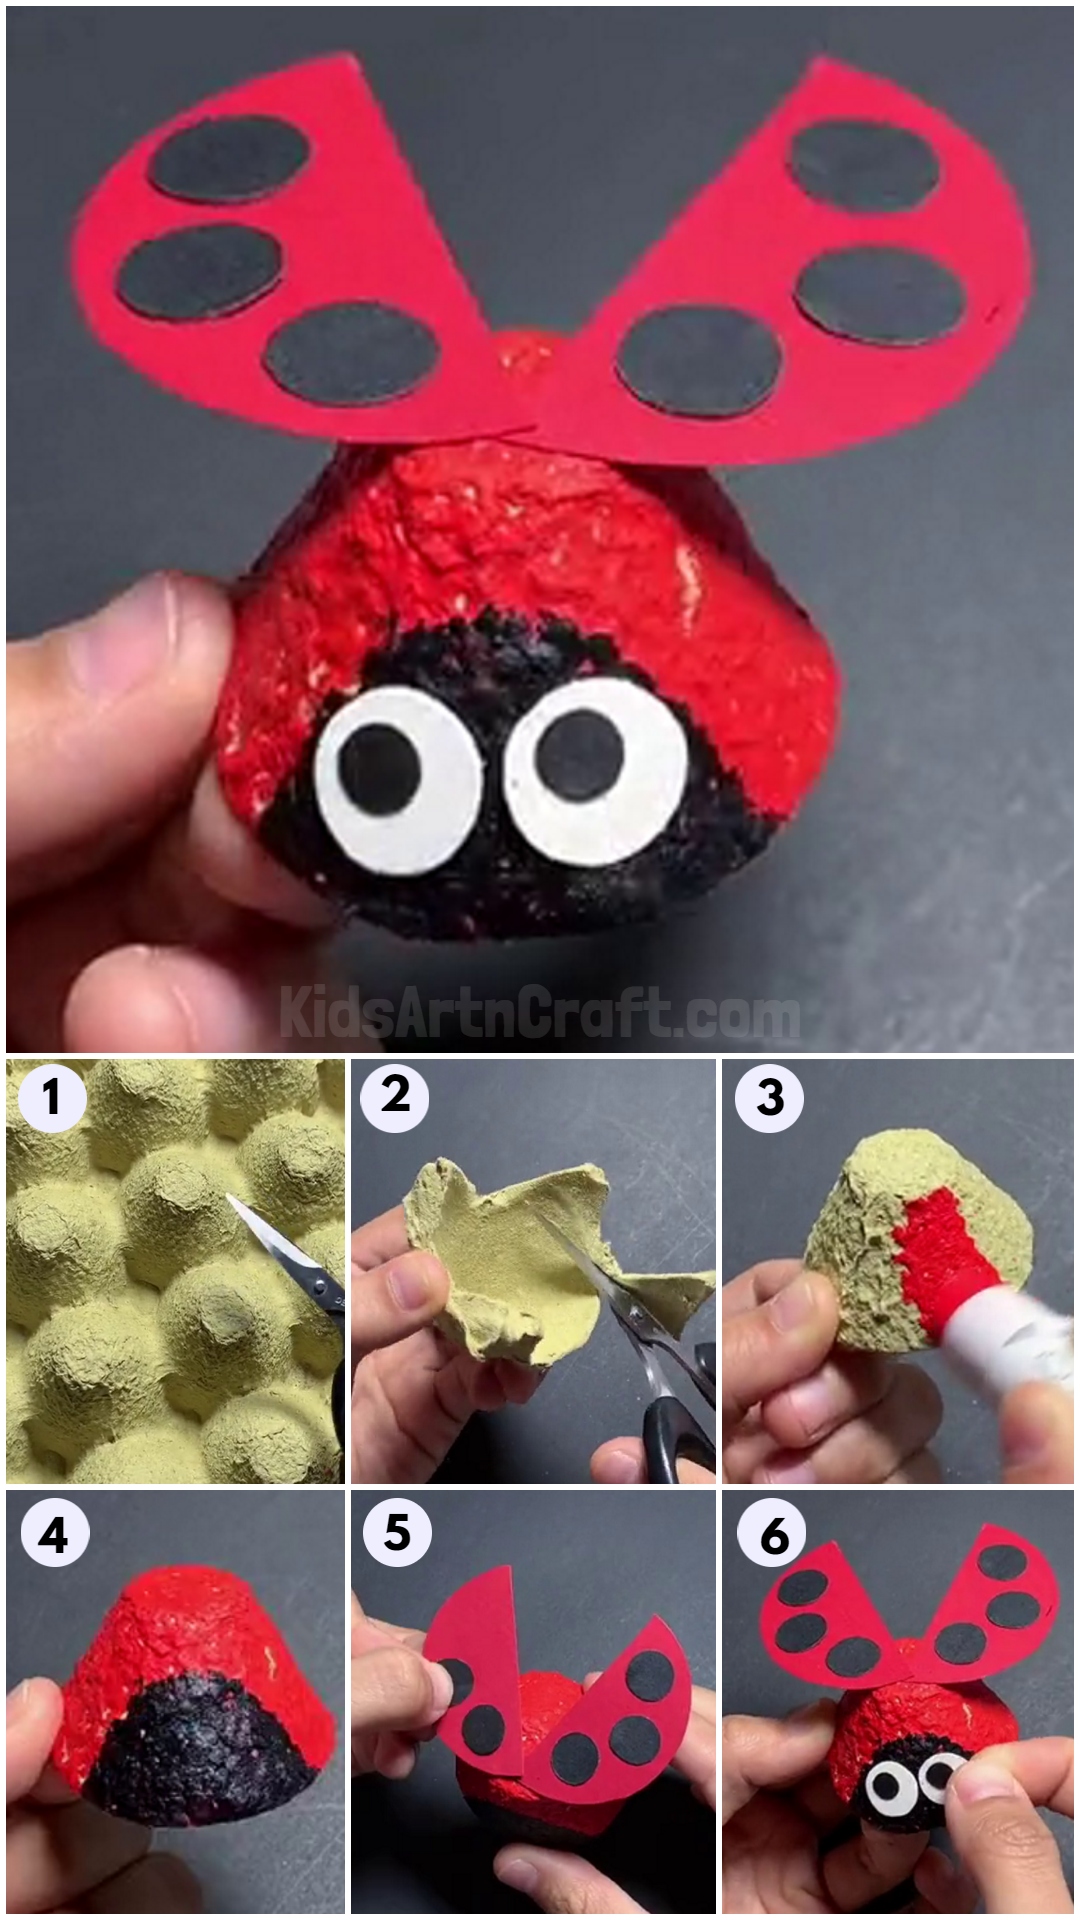 Easy Ladybugs Craft from Recycled Egg Carton